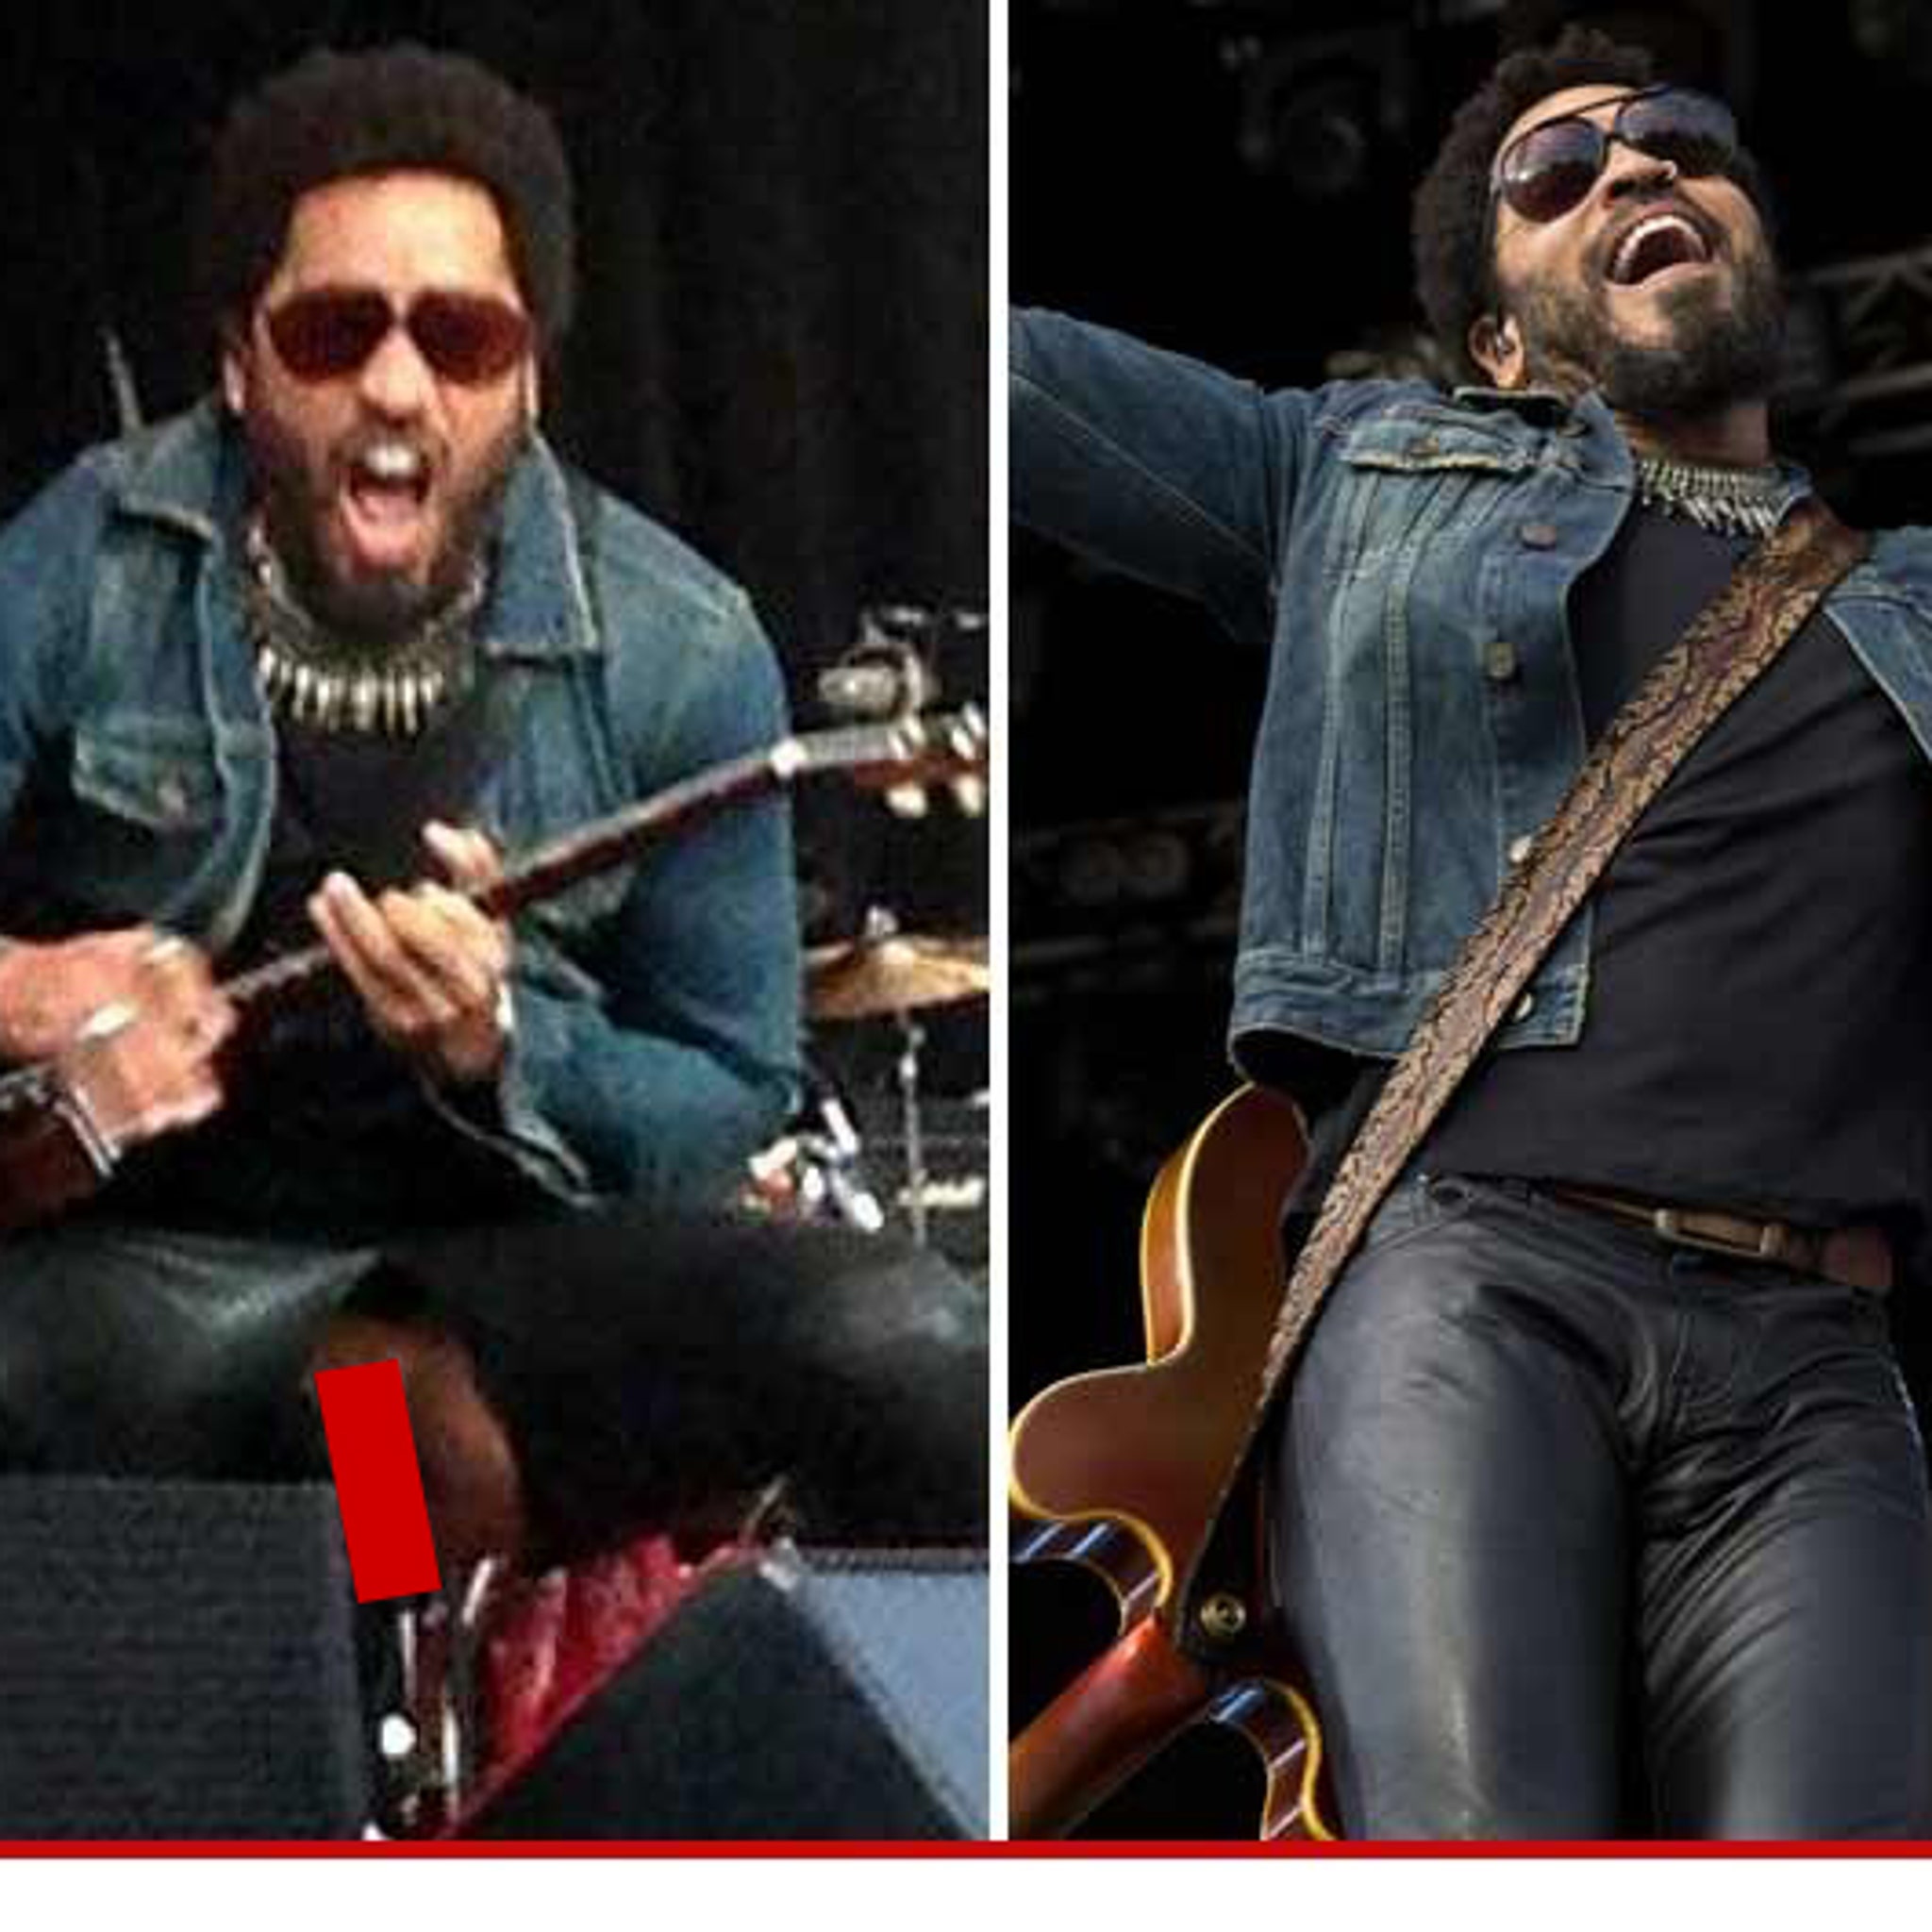 Infer Serviceable Permanently Lenny Kravitz -- Exposes Junk ... After Leather Pants Rip Open!!! (PHOTO)